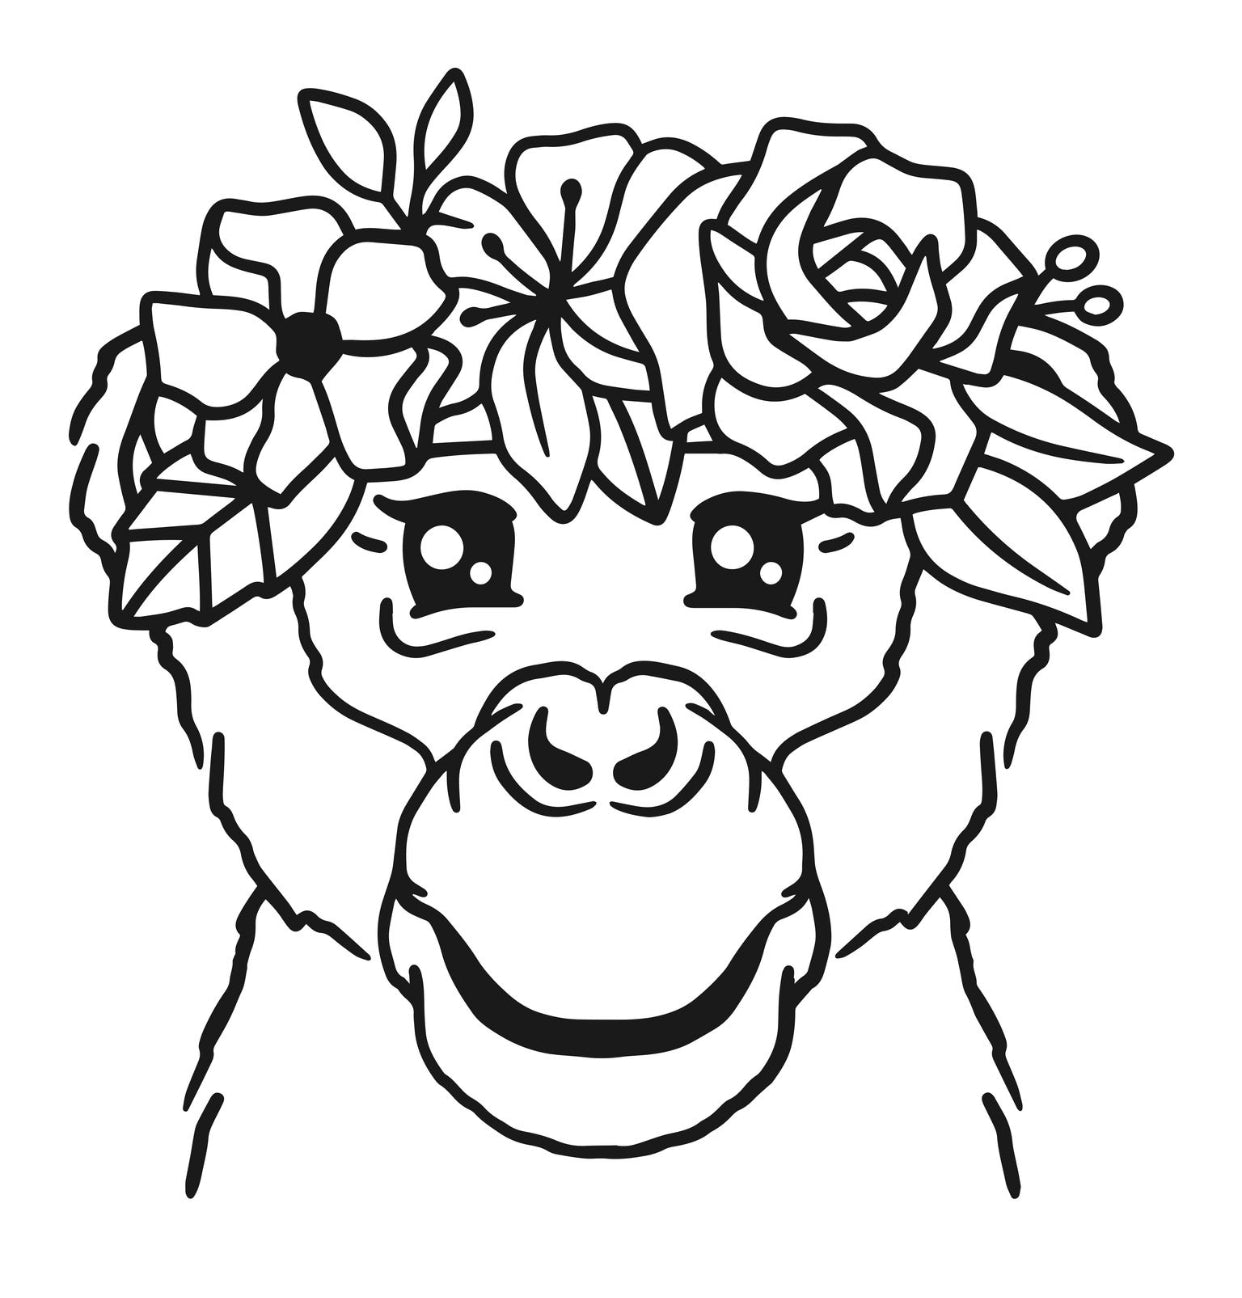 Animals With Flower Crowns